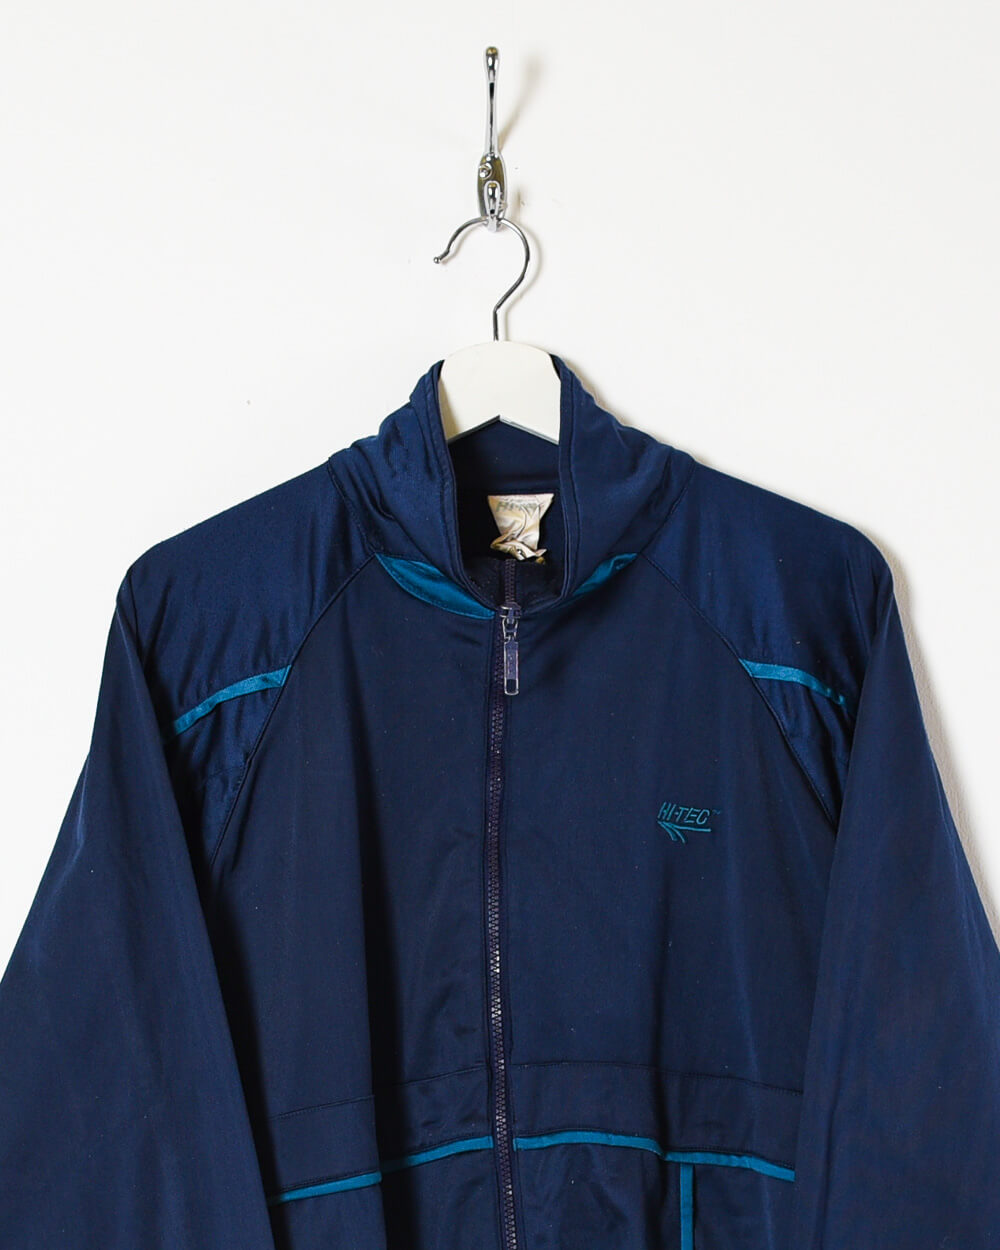 Navy Vintage Tracksuit Top - Small